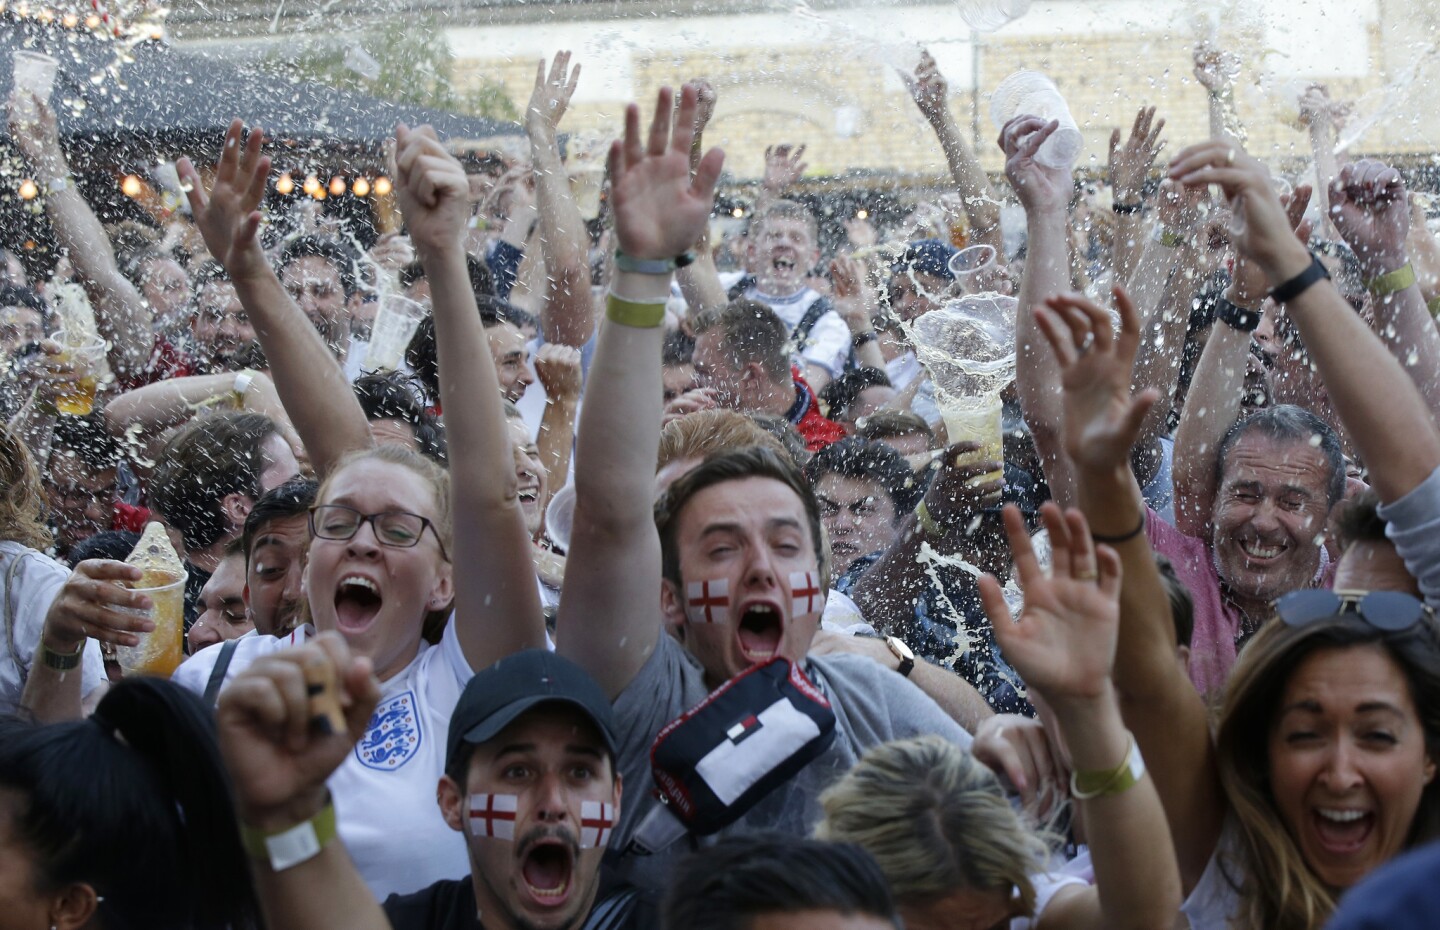 England soccer fans react as they watch a live broadcast on a big screen of the semifinal match between Croatia and England at the 2018 soccer World Cup, in Flat Iron Square, south London, Wednesday, July 11, 2018.